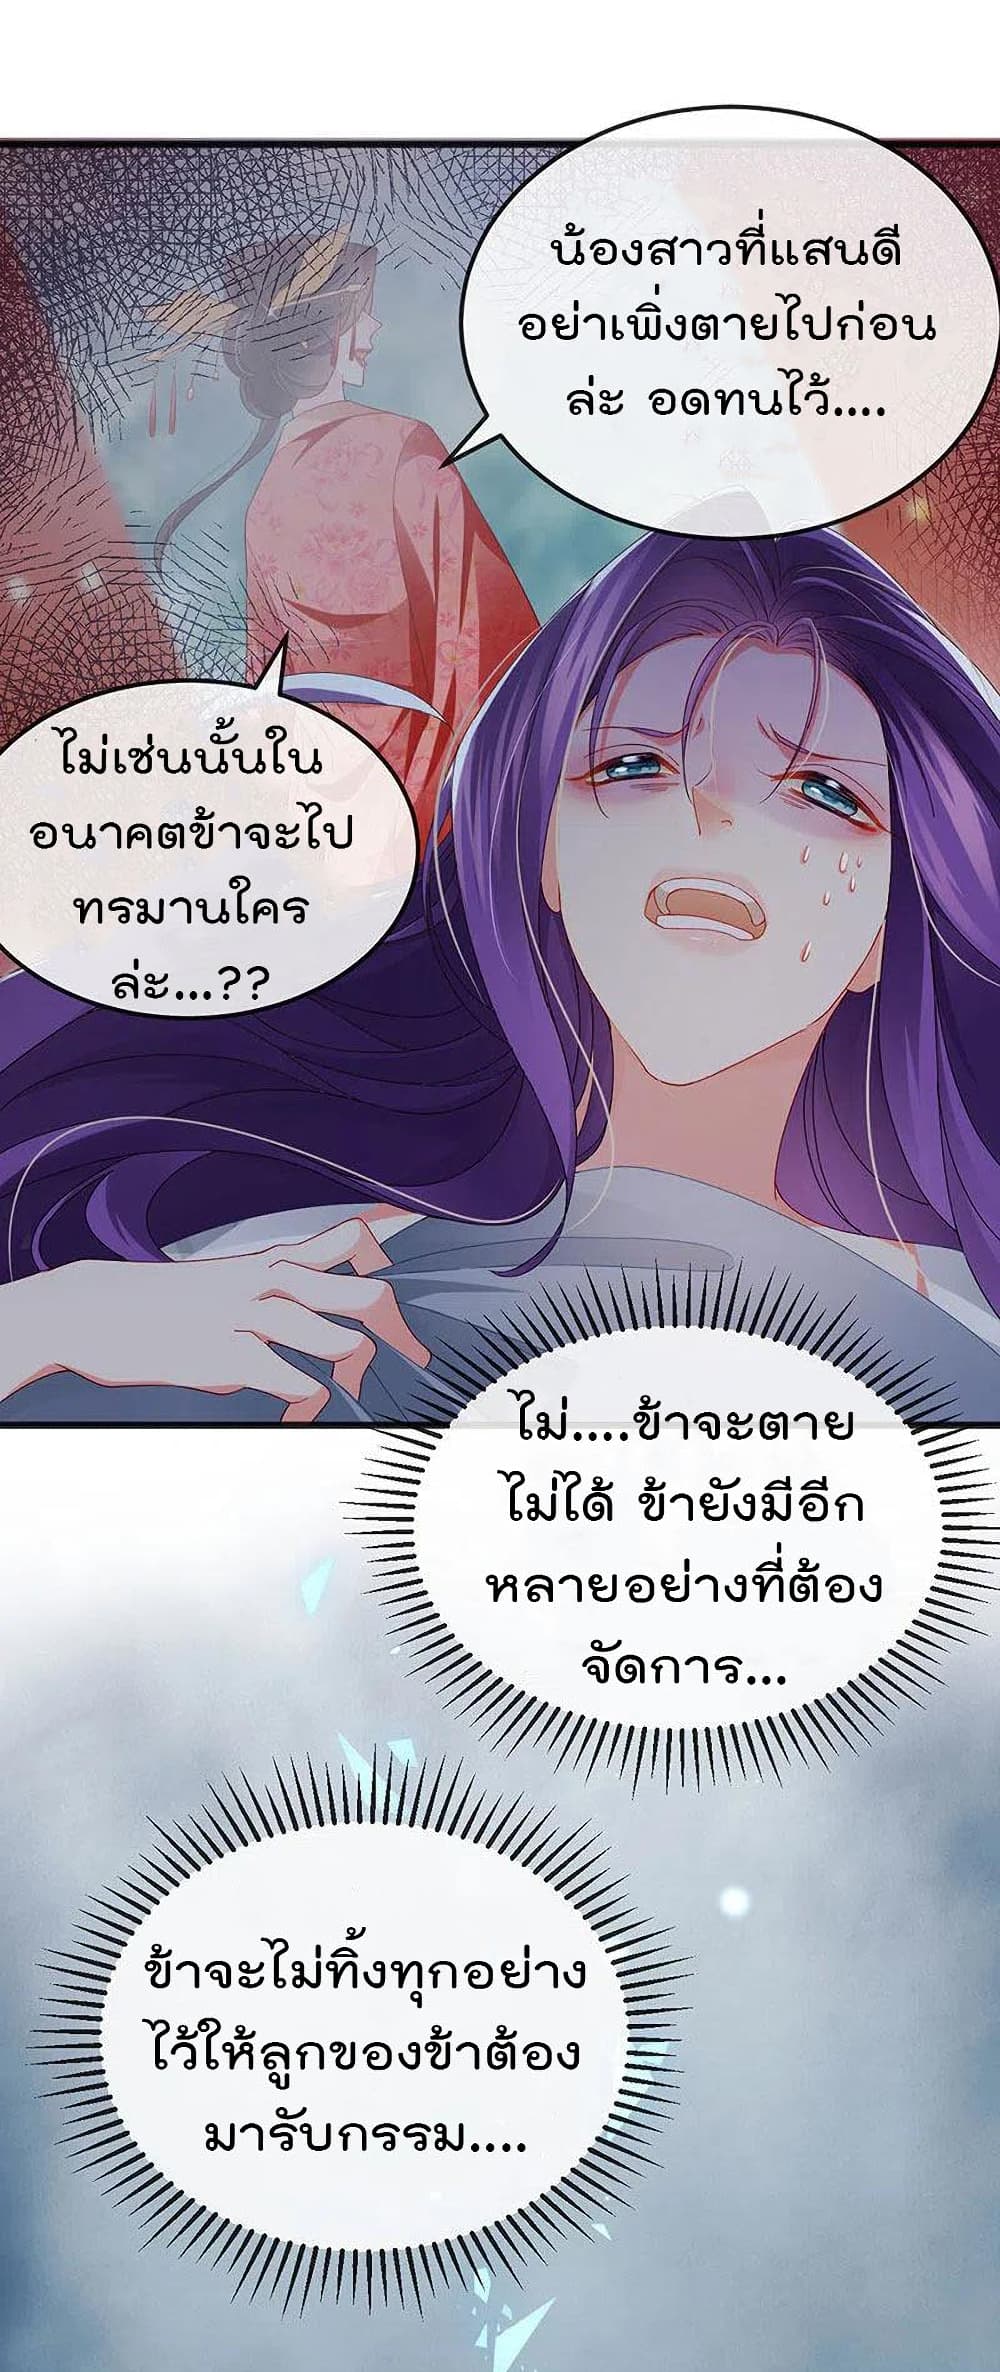 One Hundred Ways to Abuse Scum ตอนที่ 44 (37)